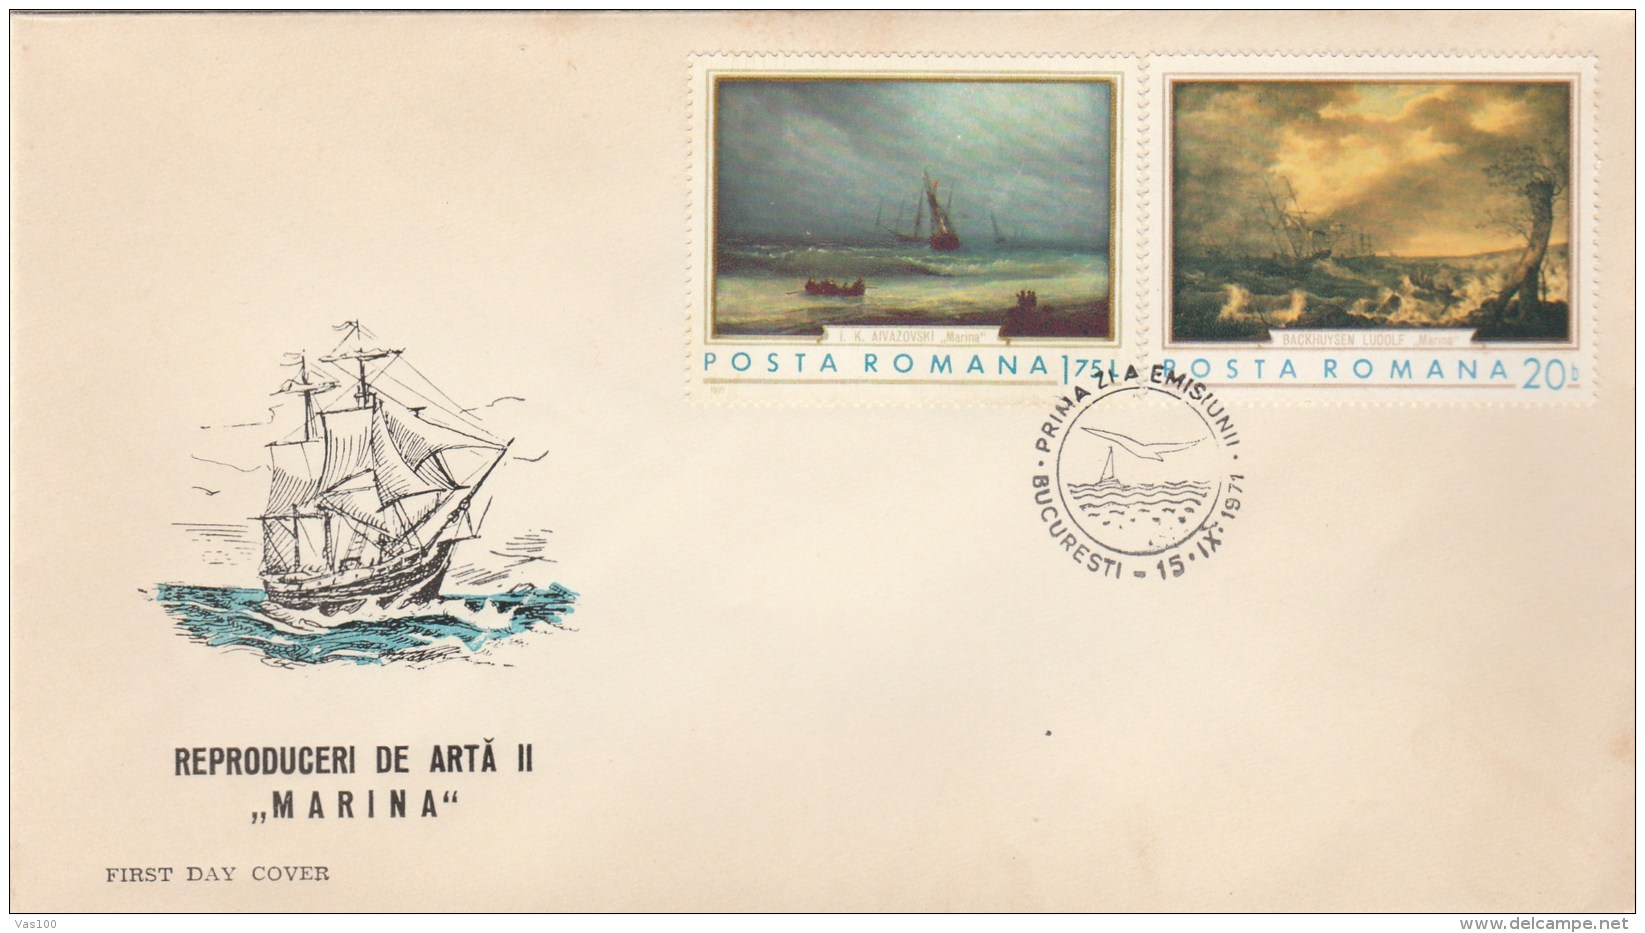 #T225  NAVY ART, SHIPS, PAINTINGS, COVERS FDC X 3, 1971, ROMANIA. - FDC